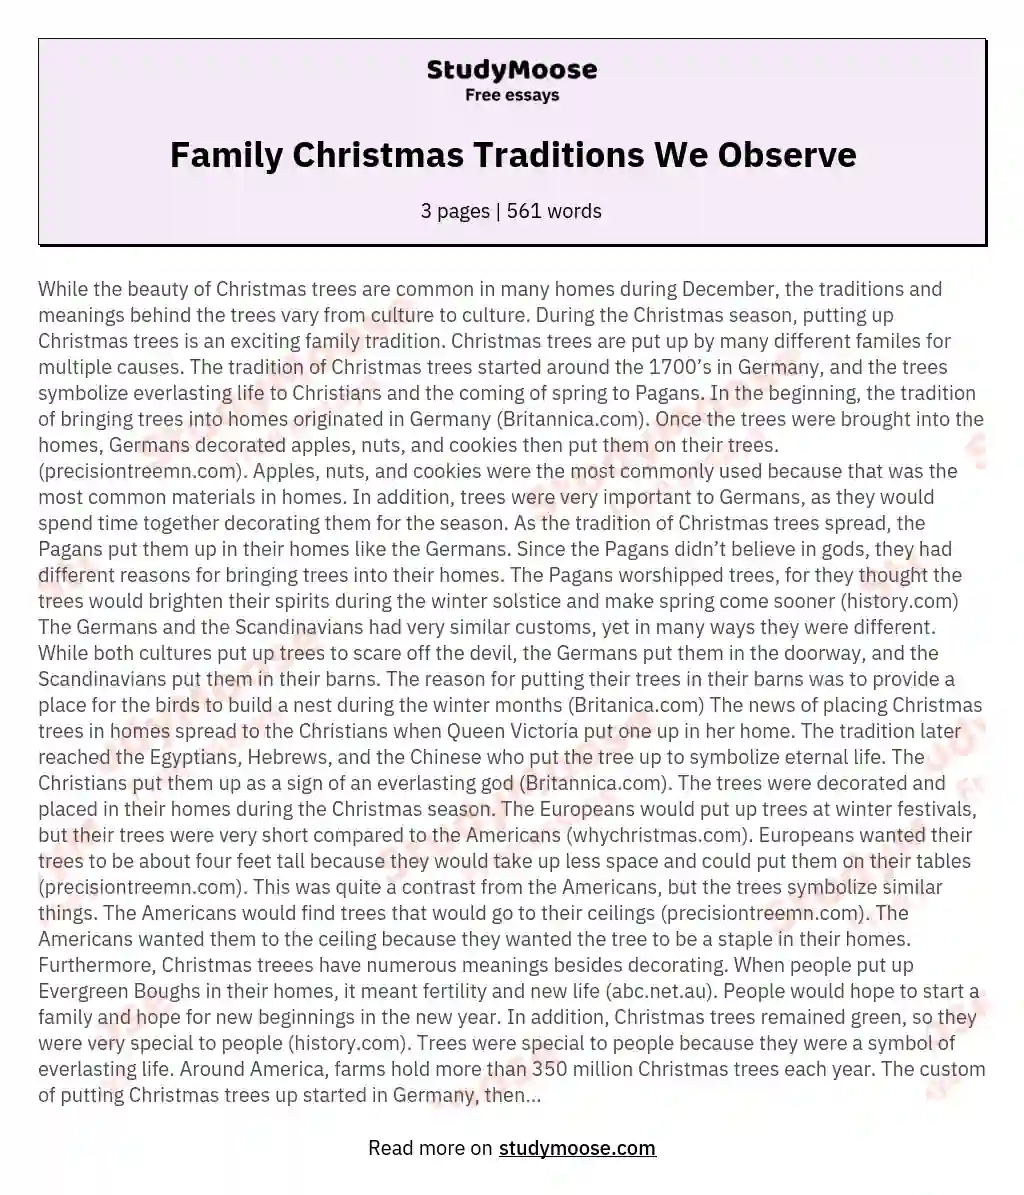 Family Christmas Traditions We Observe essay